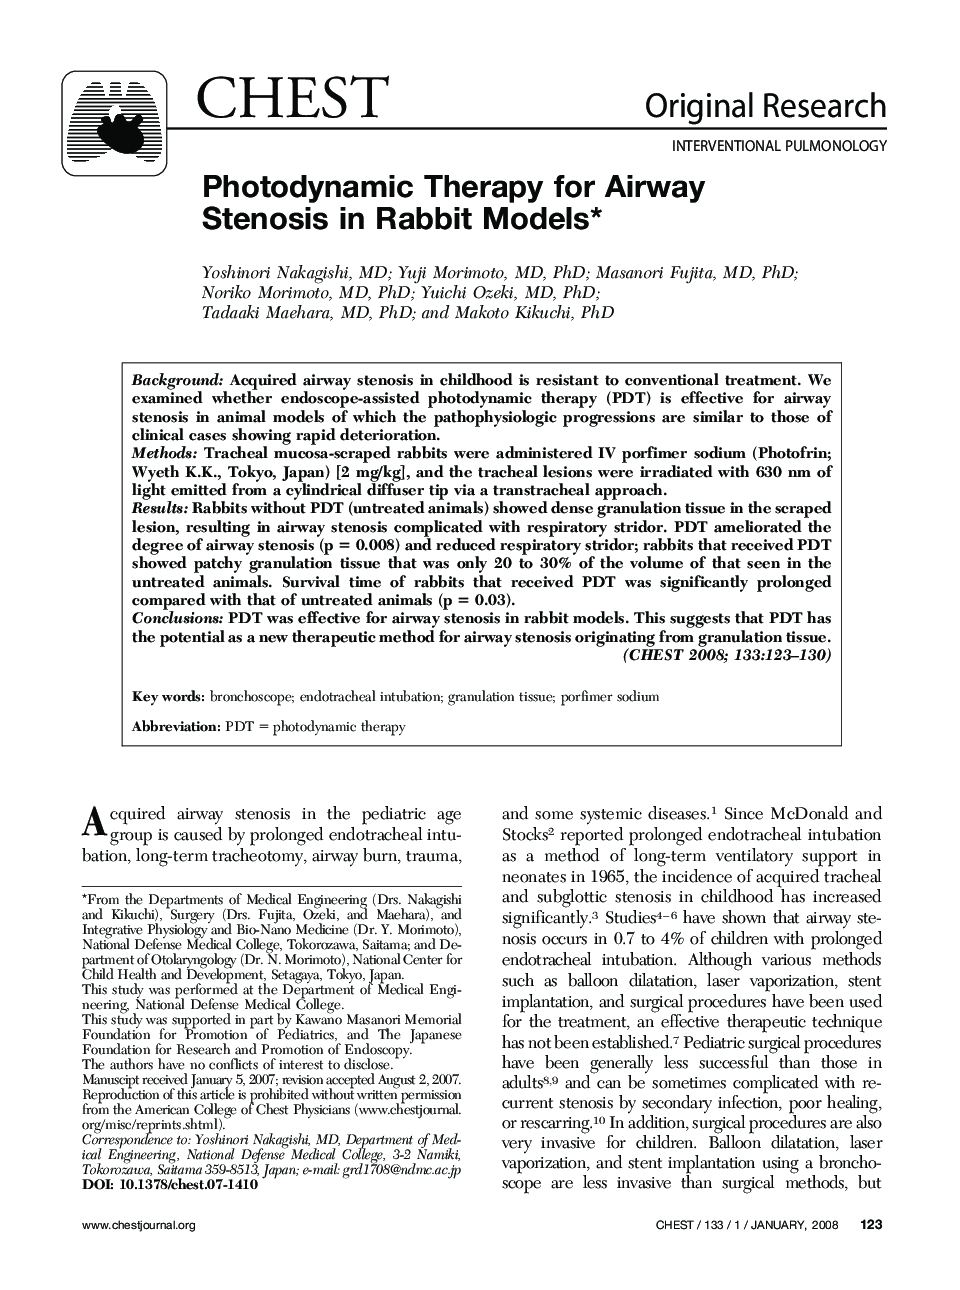 Photodynamic Therapy for Airway Stenosis in Rabbit Models 